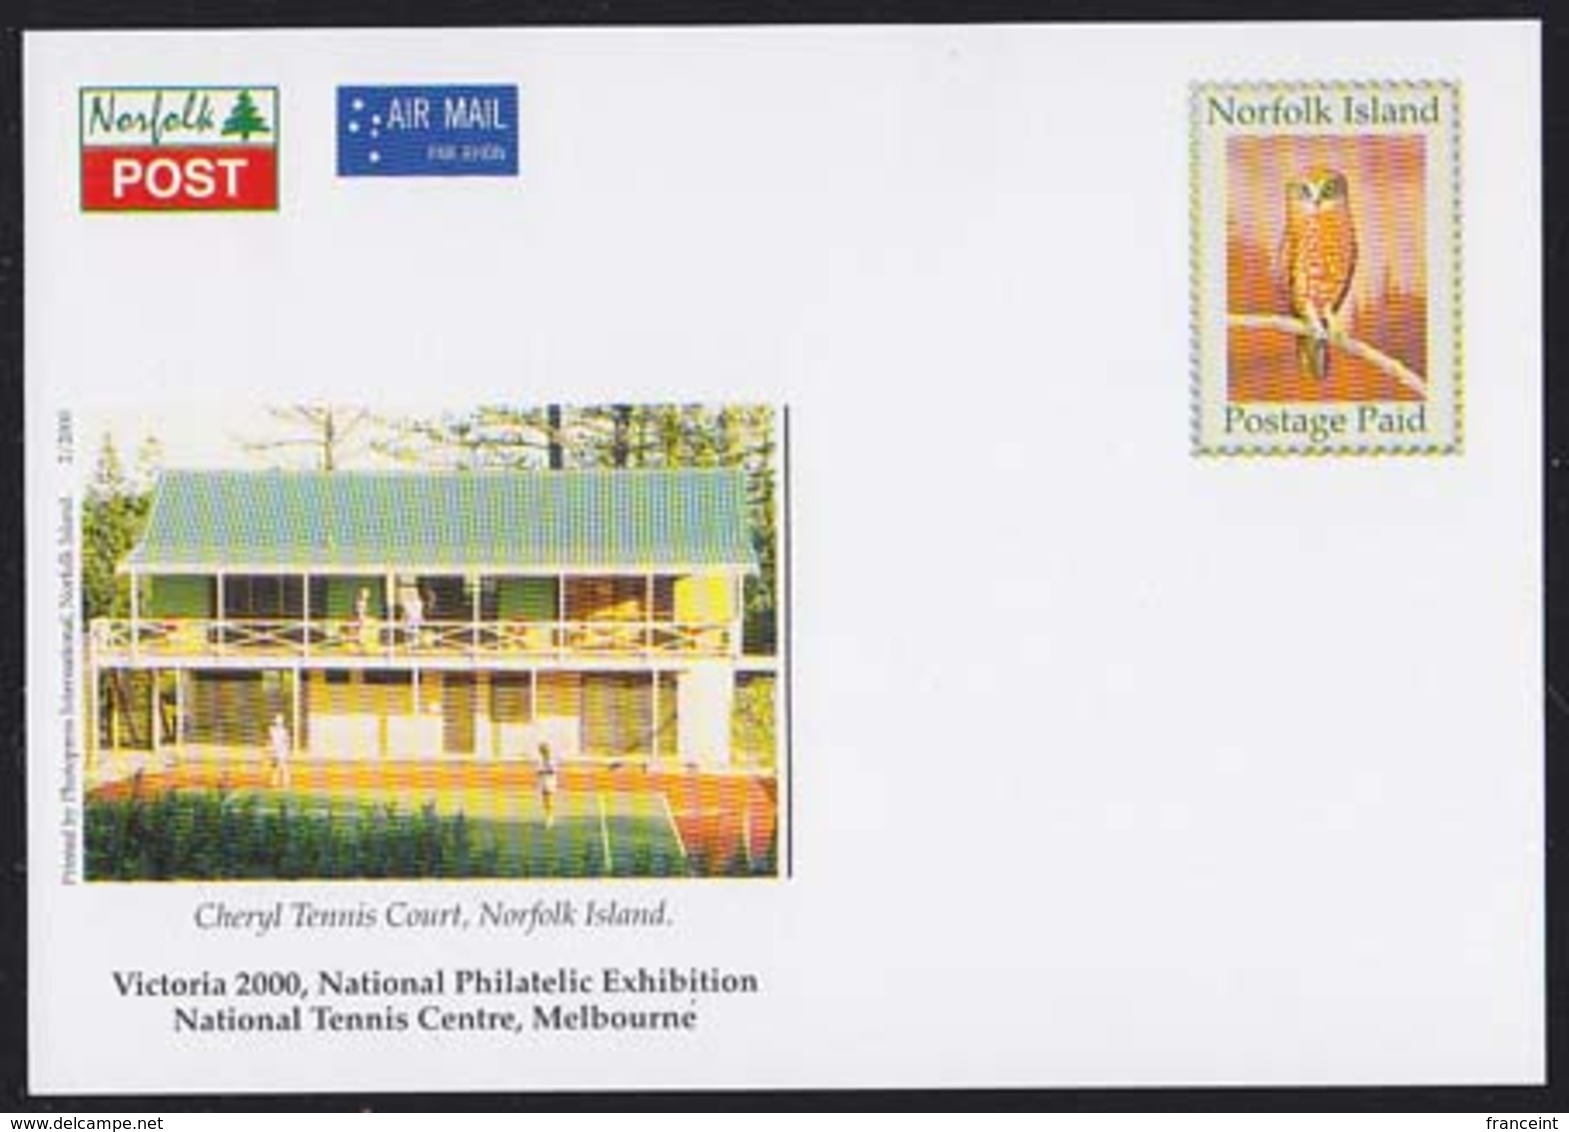 NORFOLK ISLAND (2000) Owl. Postage Paid Airmail Postcard (mint) With Corner Illustration Of Cheryl Tennis Court. - Norfolkinsel